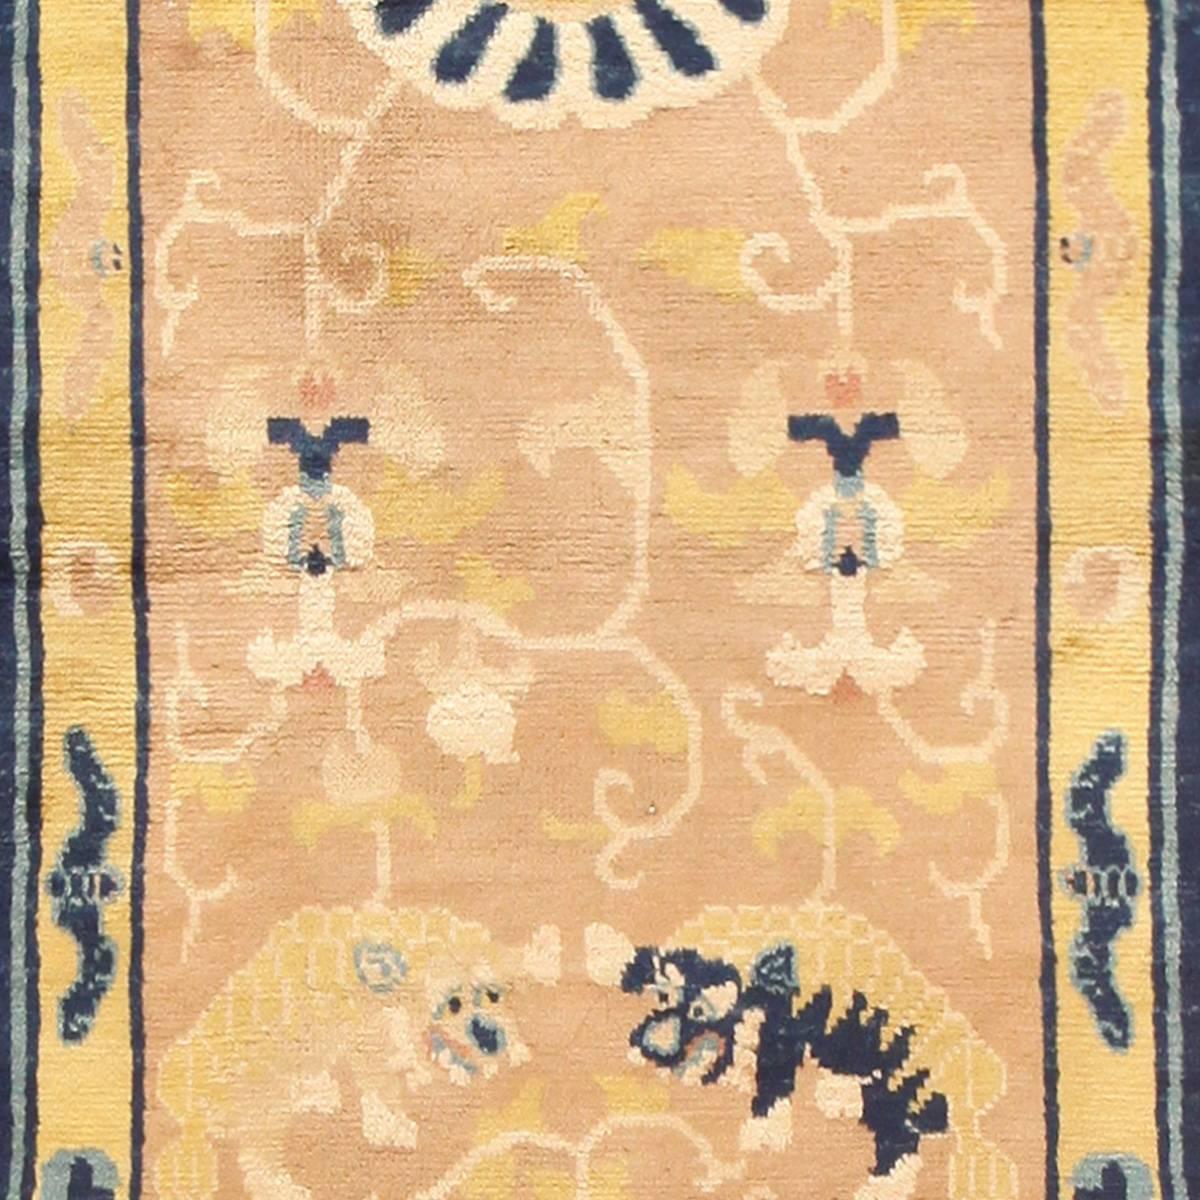 Antique Chinese rugs as opposed to most of the antique rug productions were woven almost exclusively for internal consumption. Since they were mostly sheltered from European and western influences, this offers us the reason why these carpets have a